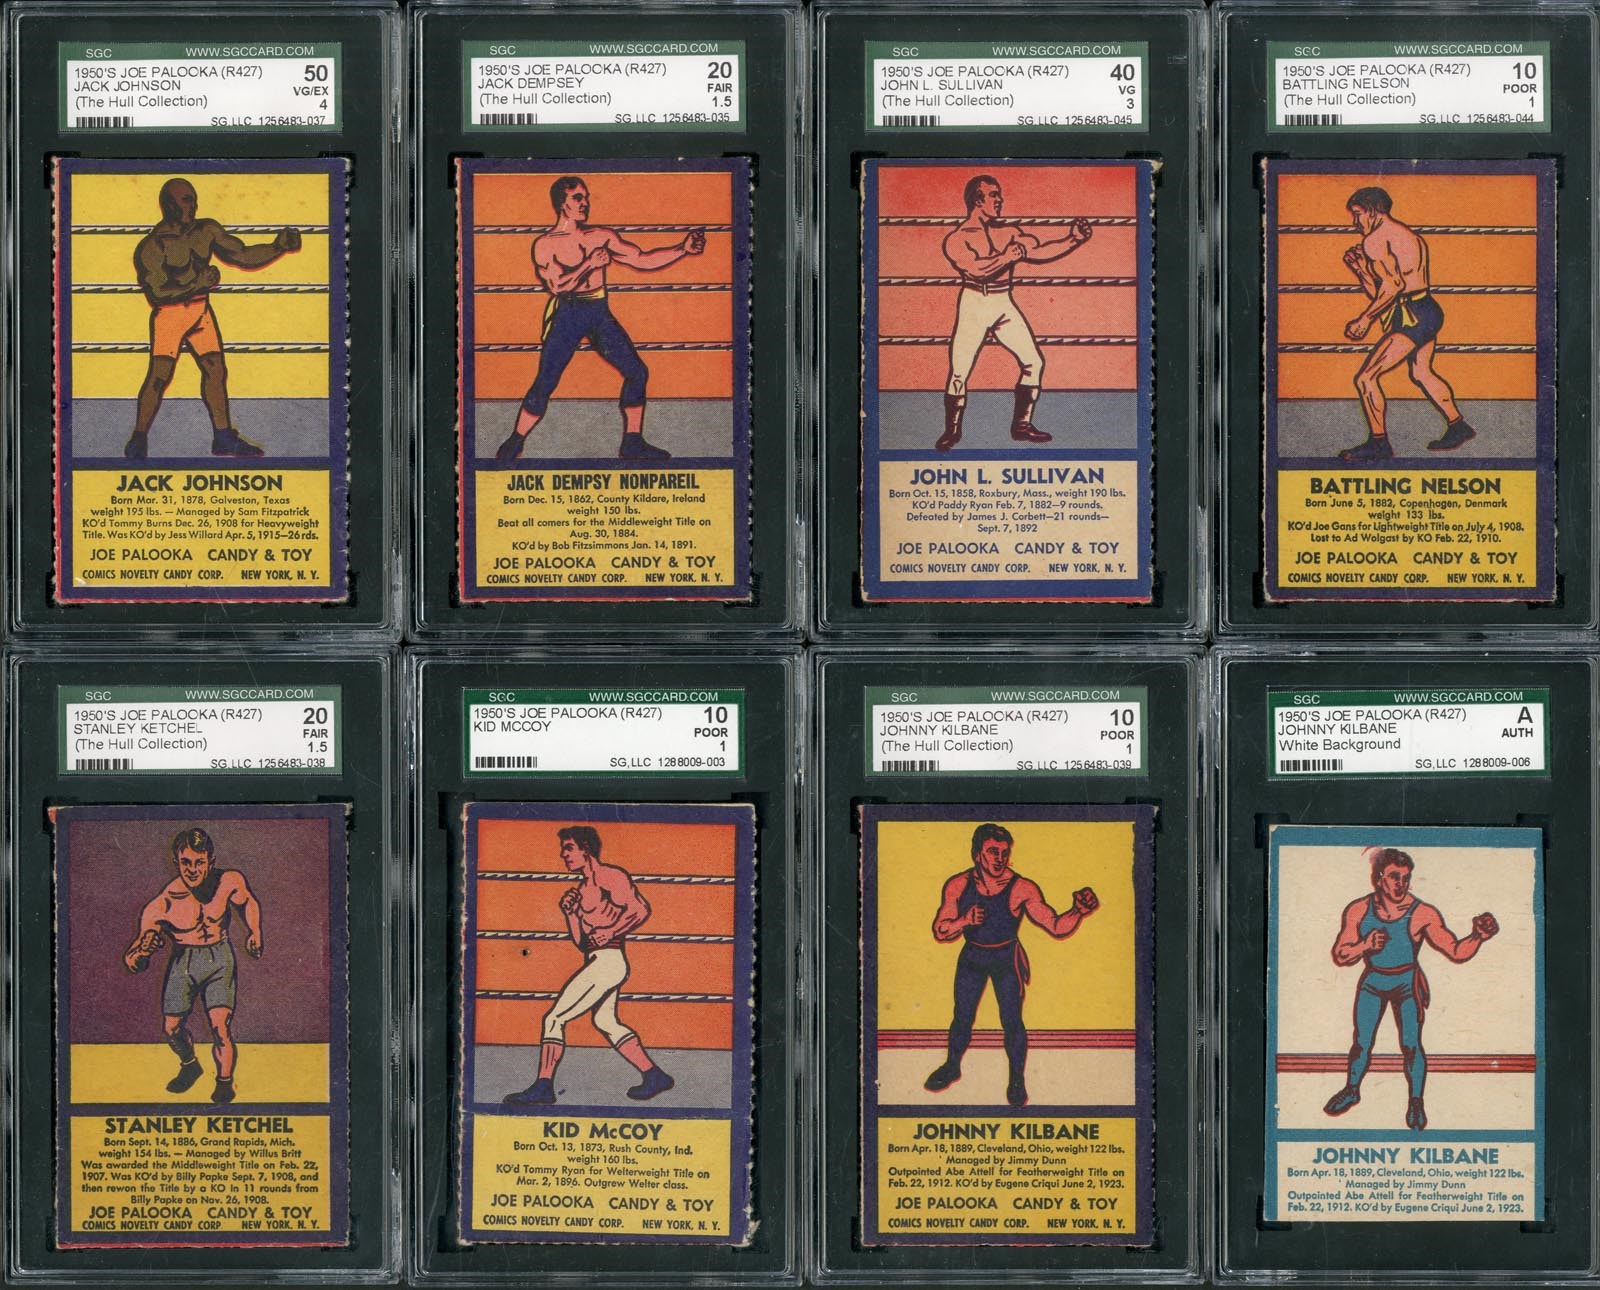 1950's Joe Palooka R427 Collection - Complete Set of 12, plus Two Duplicates Cards (SGC Graded)